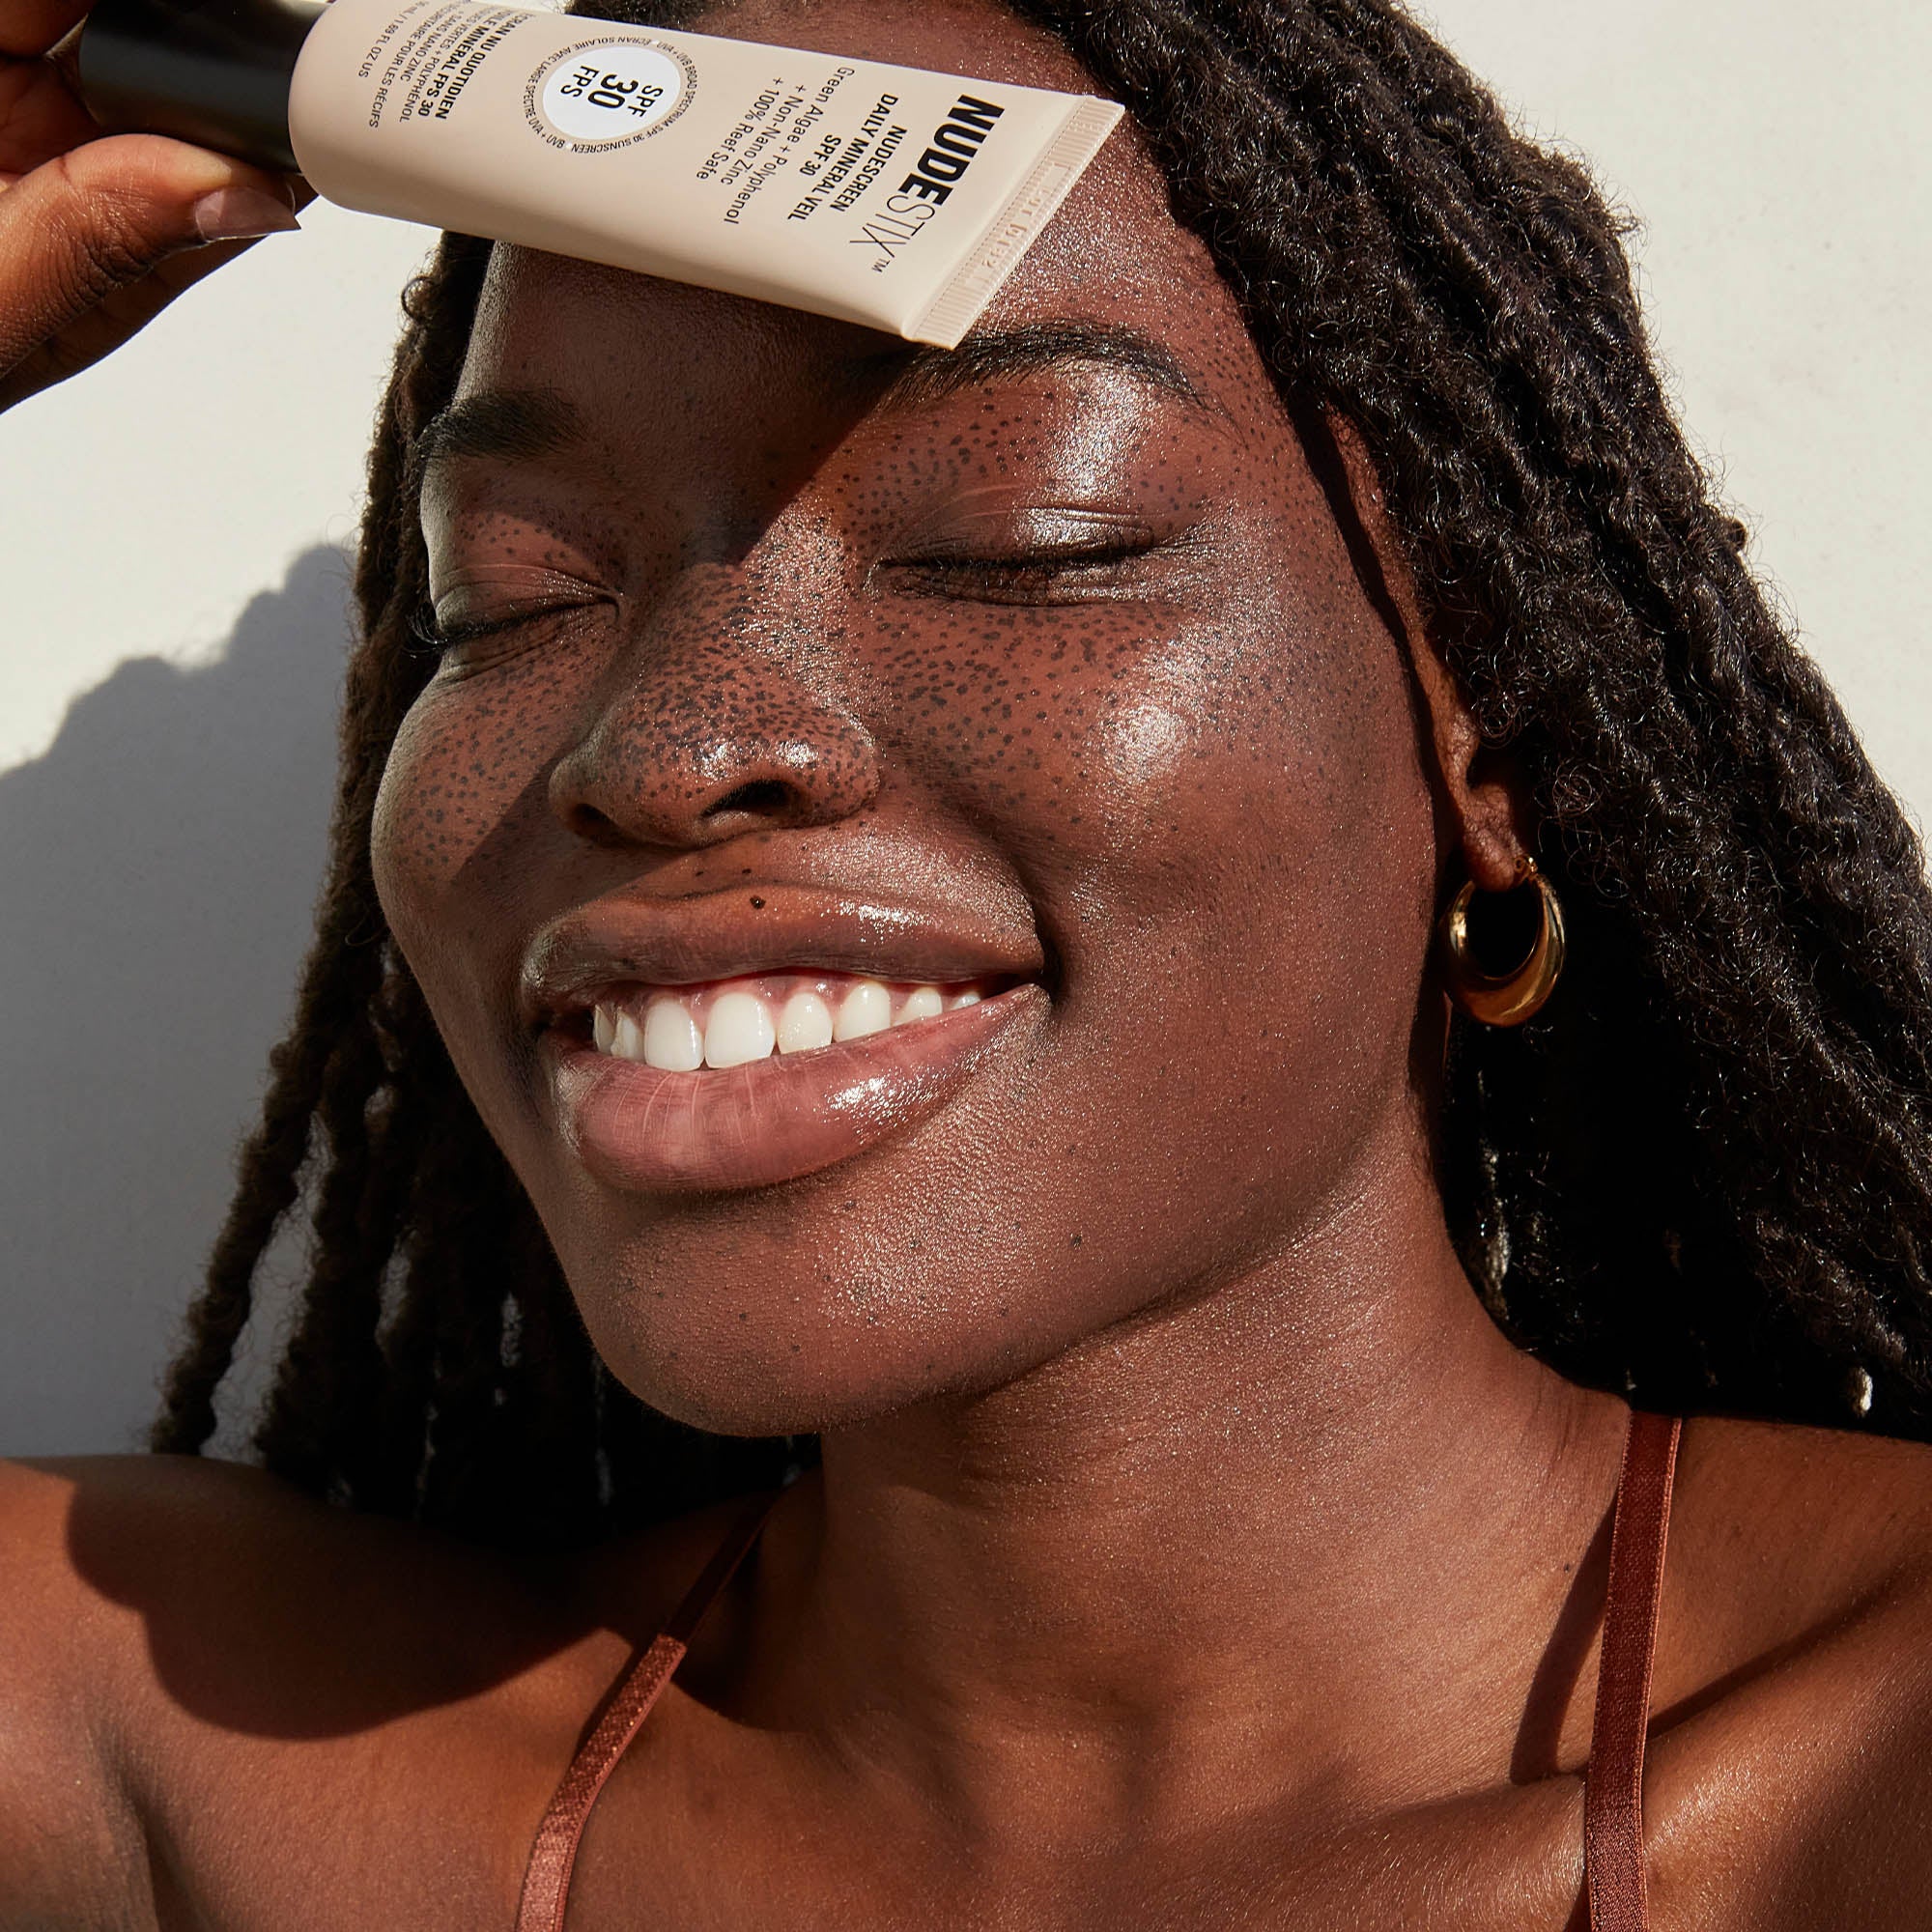 Dark skinned freckled young woman smiling while holding a tube of Nudescreen Daily Mineral Veil